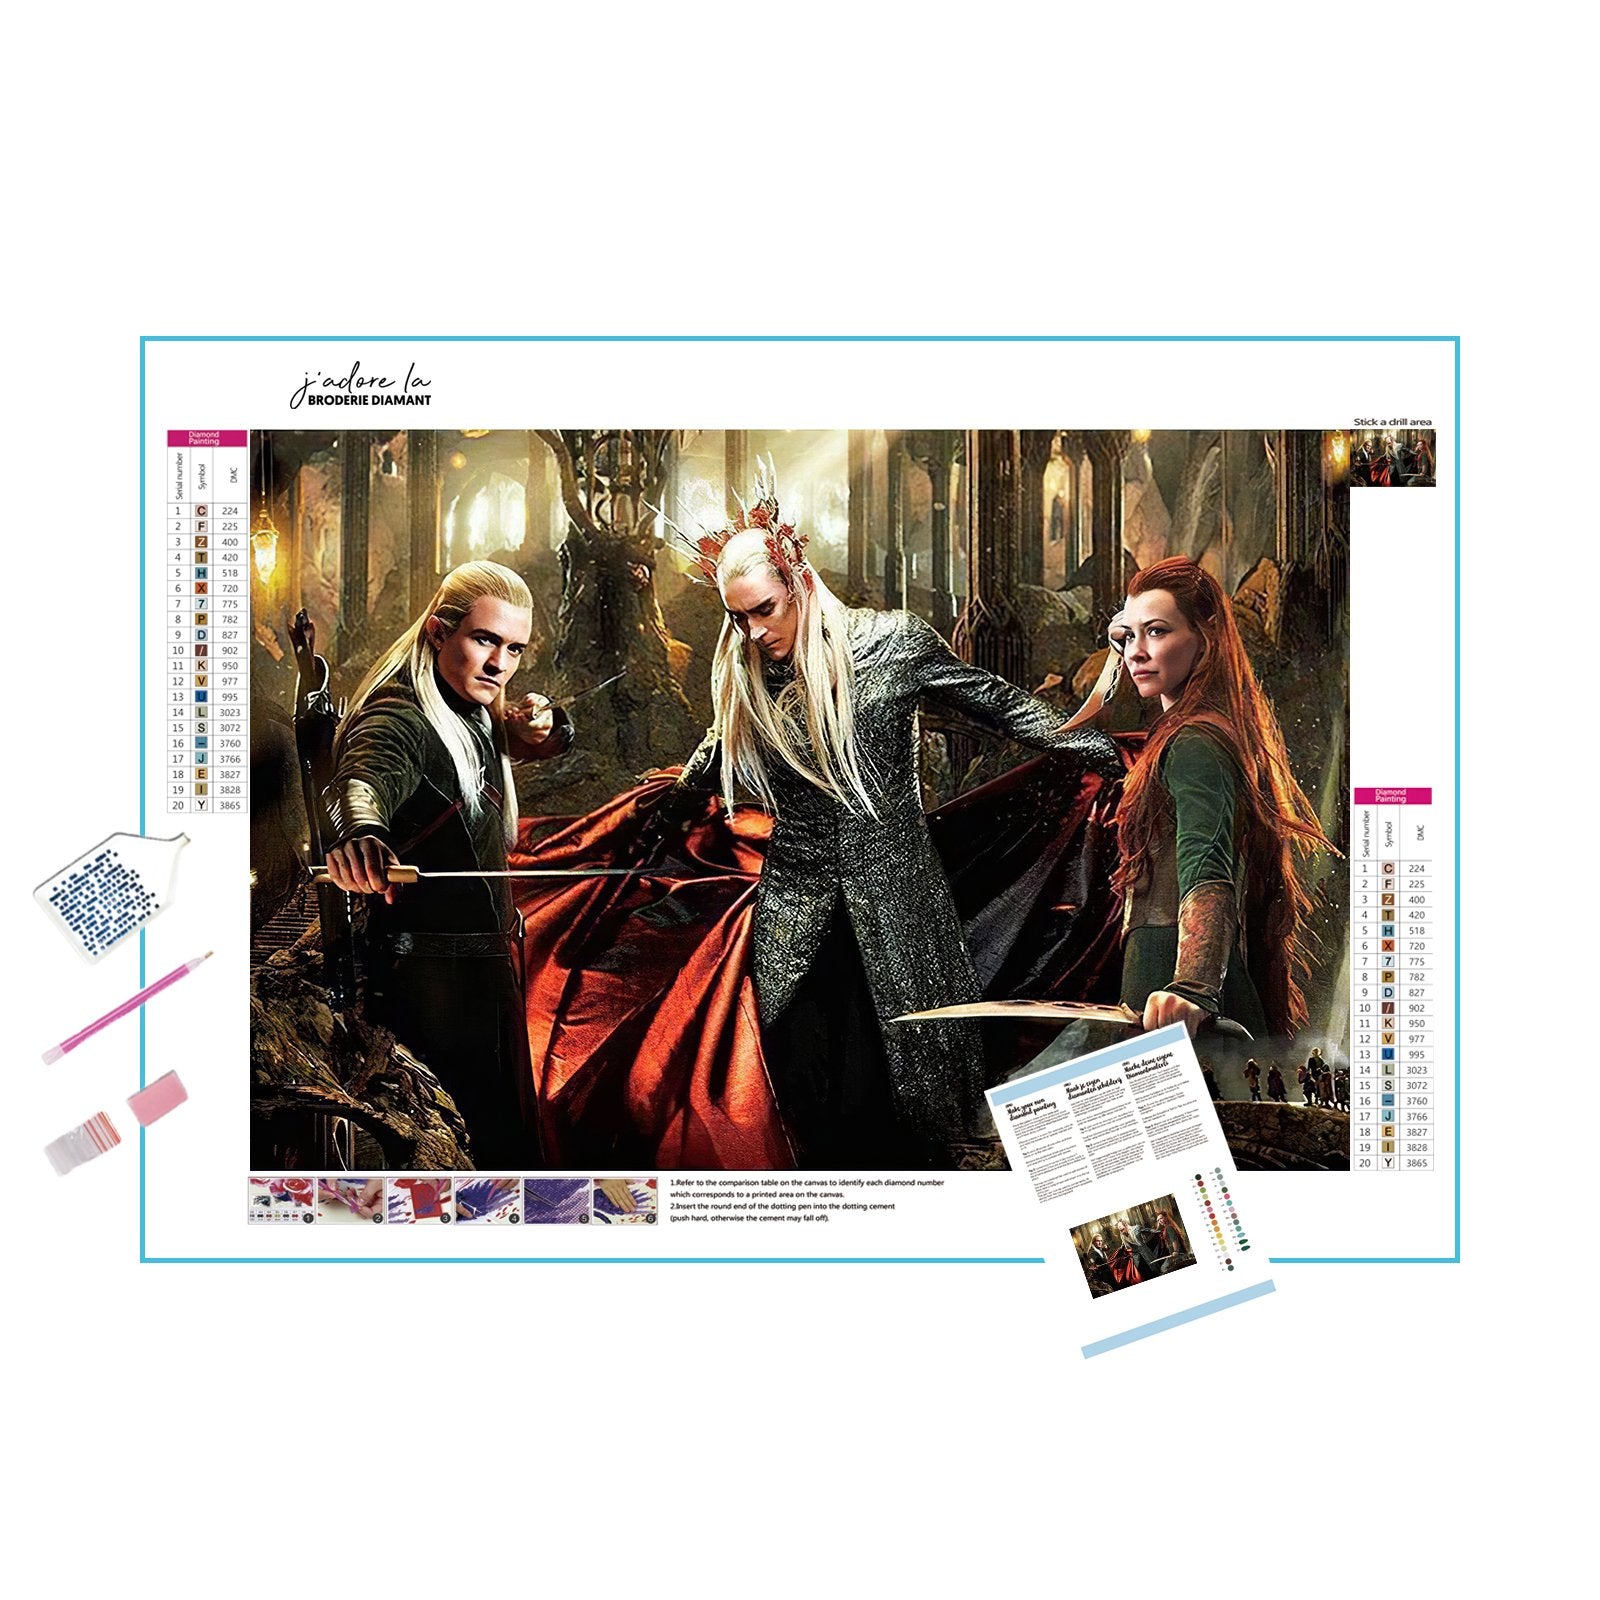 Legolas, Tauriel And Thranduil From The Hobbit